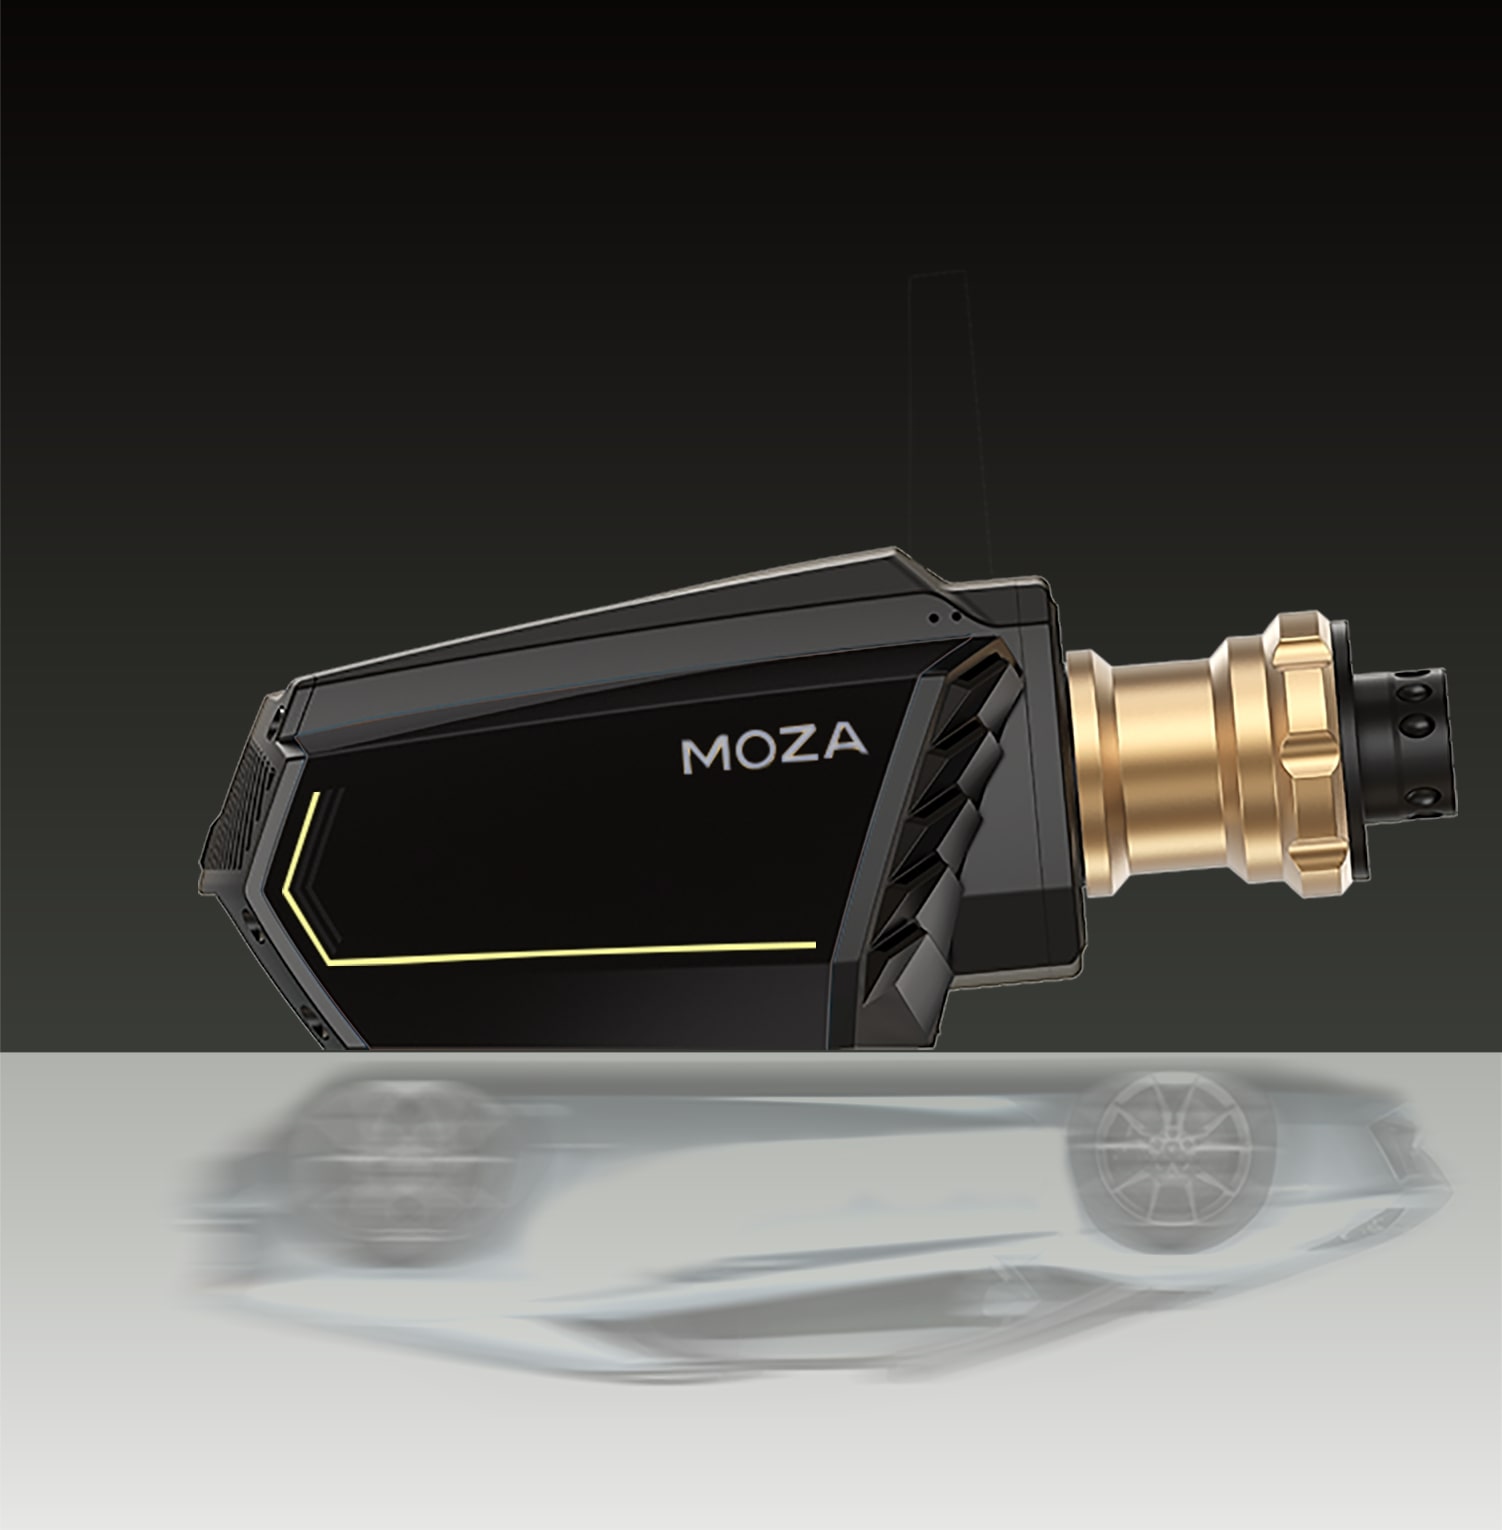 Introducing the upgraded MOZA CS V2P! Visit www.mozaracing.com to